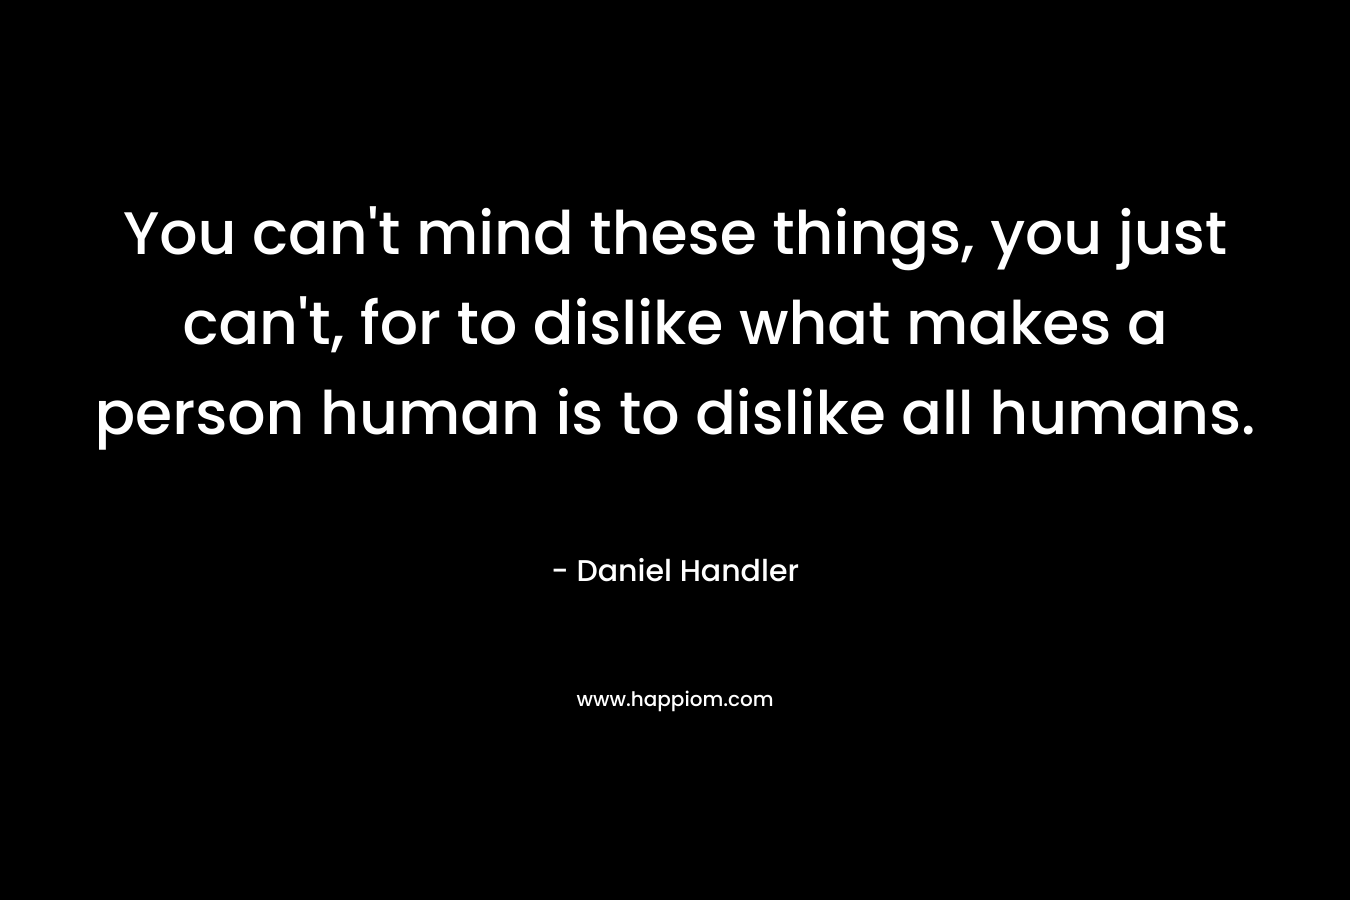 You can't mind these things, you just can't, for to dislike what makes a person human is to dislike all humans.